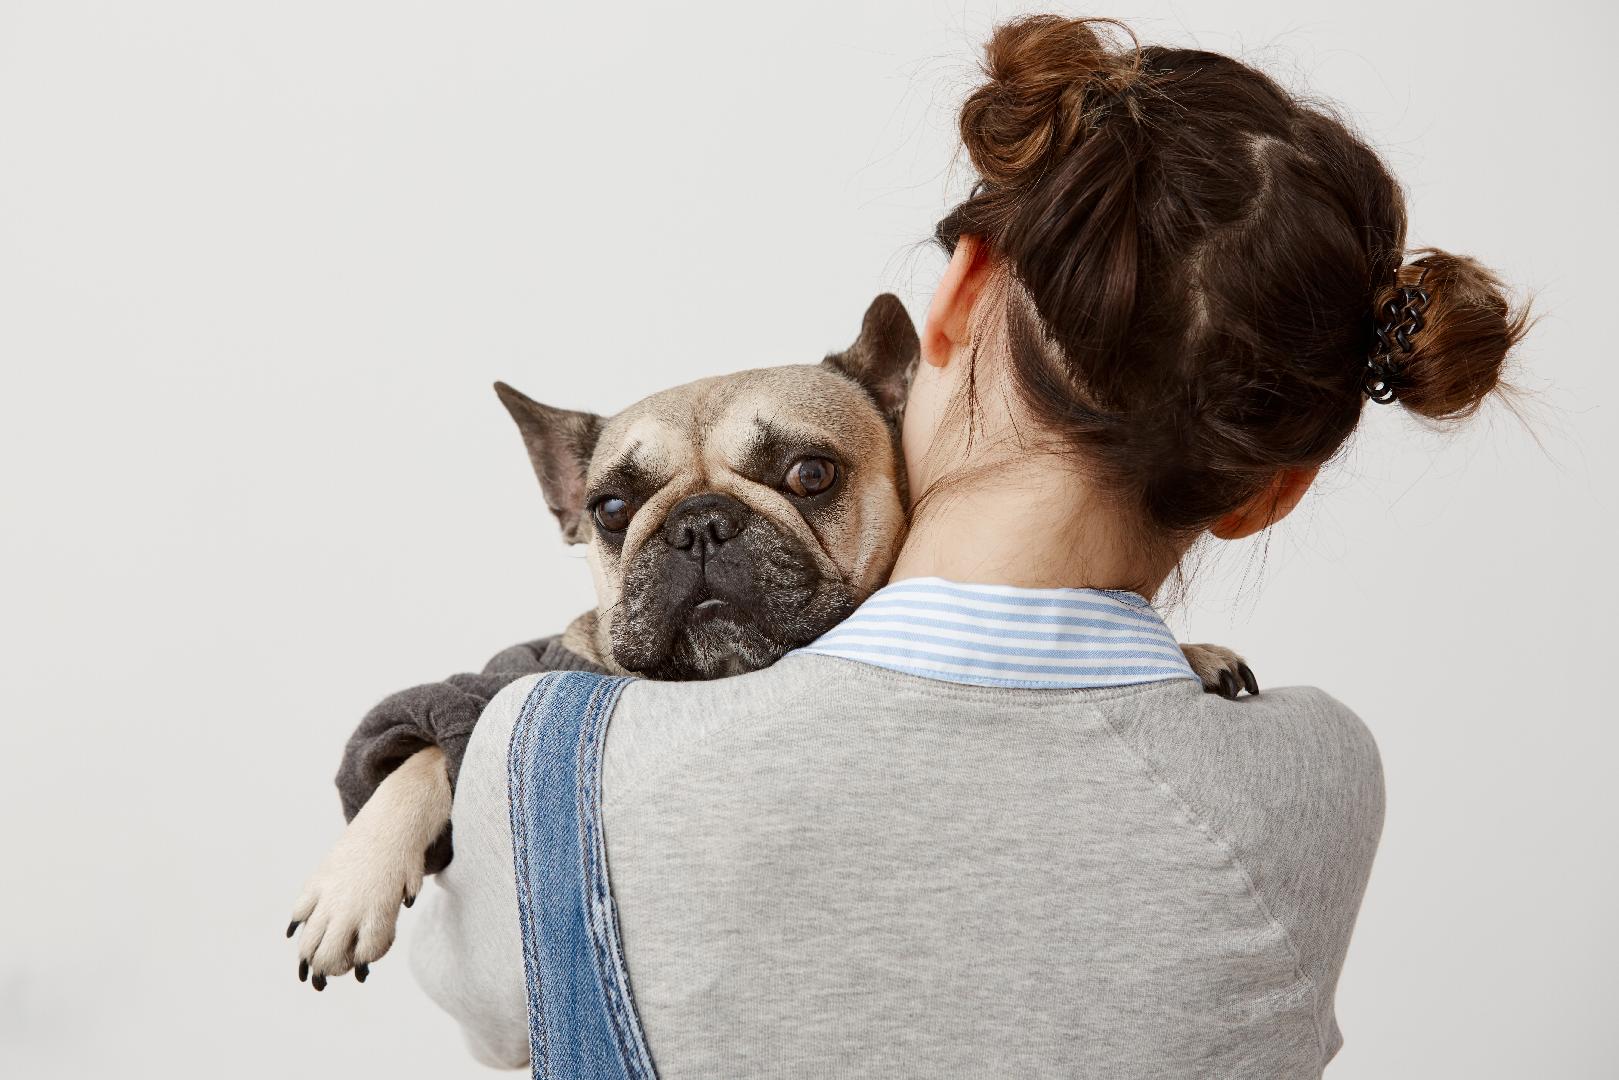 Pet Parents and their pets sharing the search for well-being